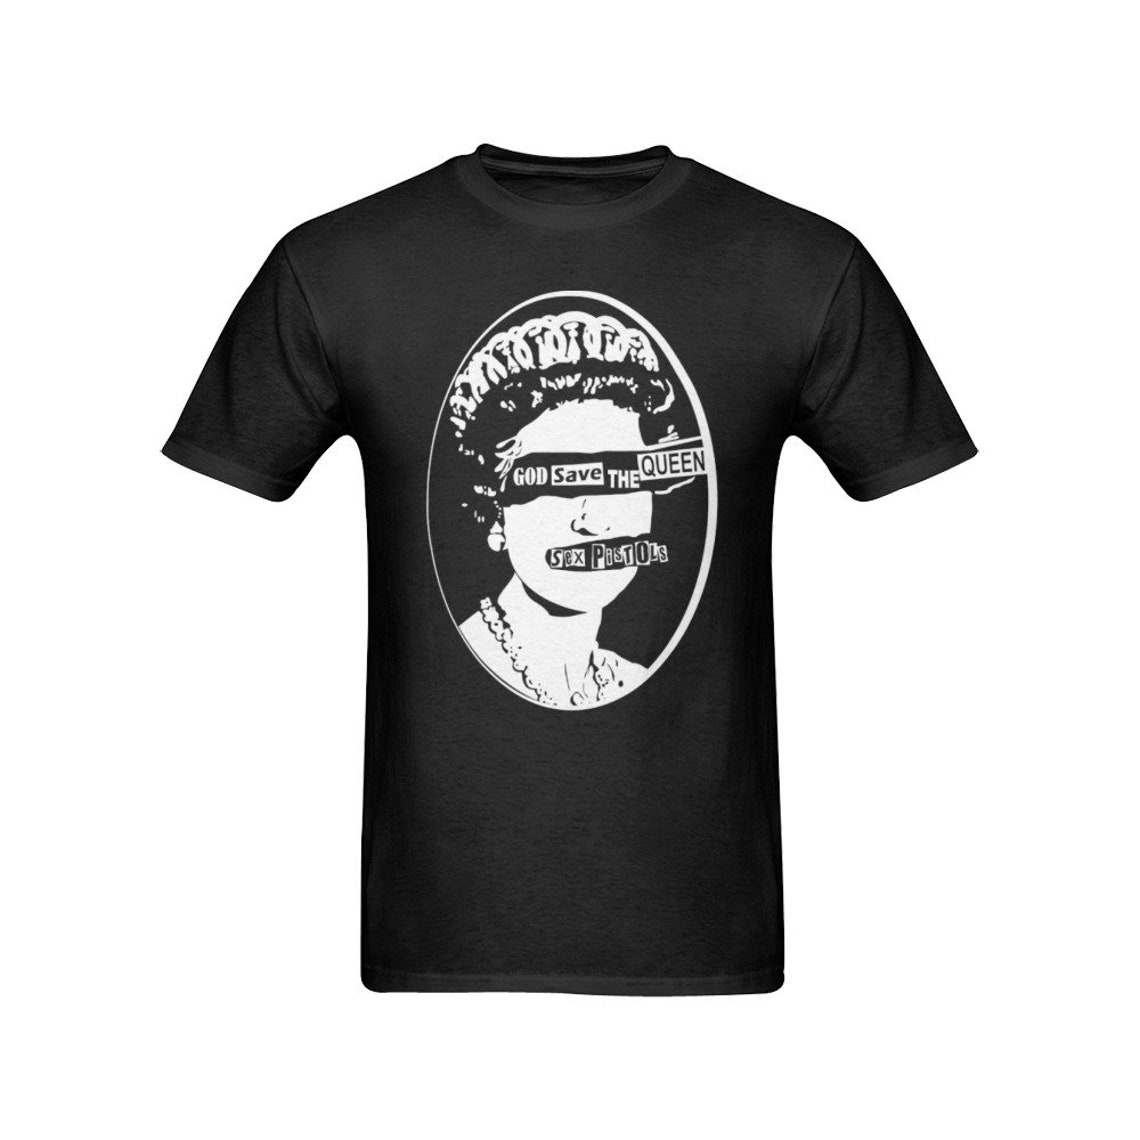 Sex Pistols God Save The Queen Tee Shirt Etsy